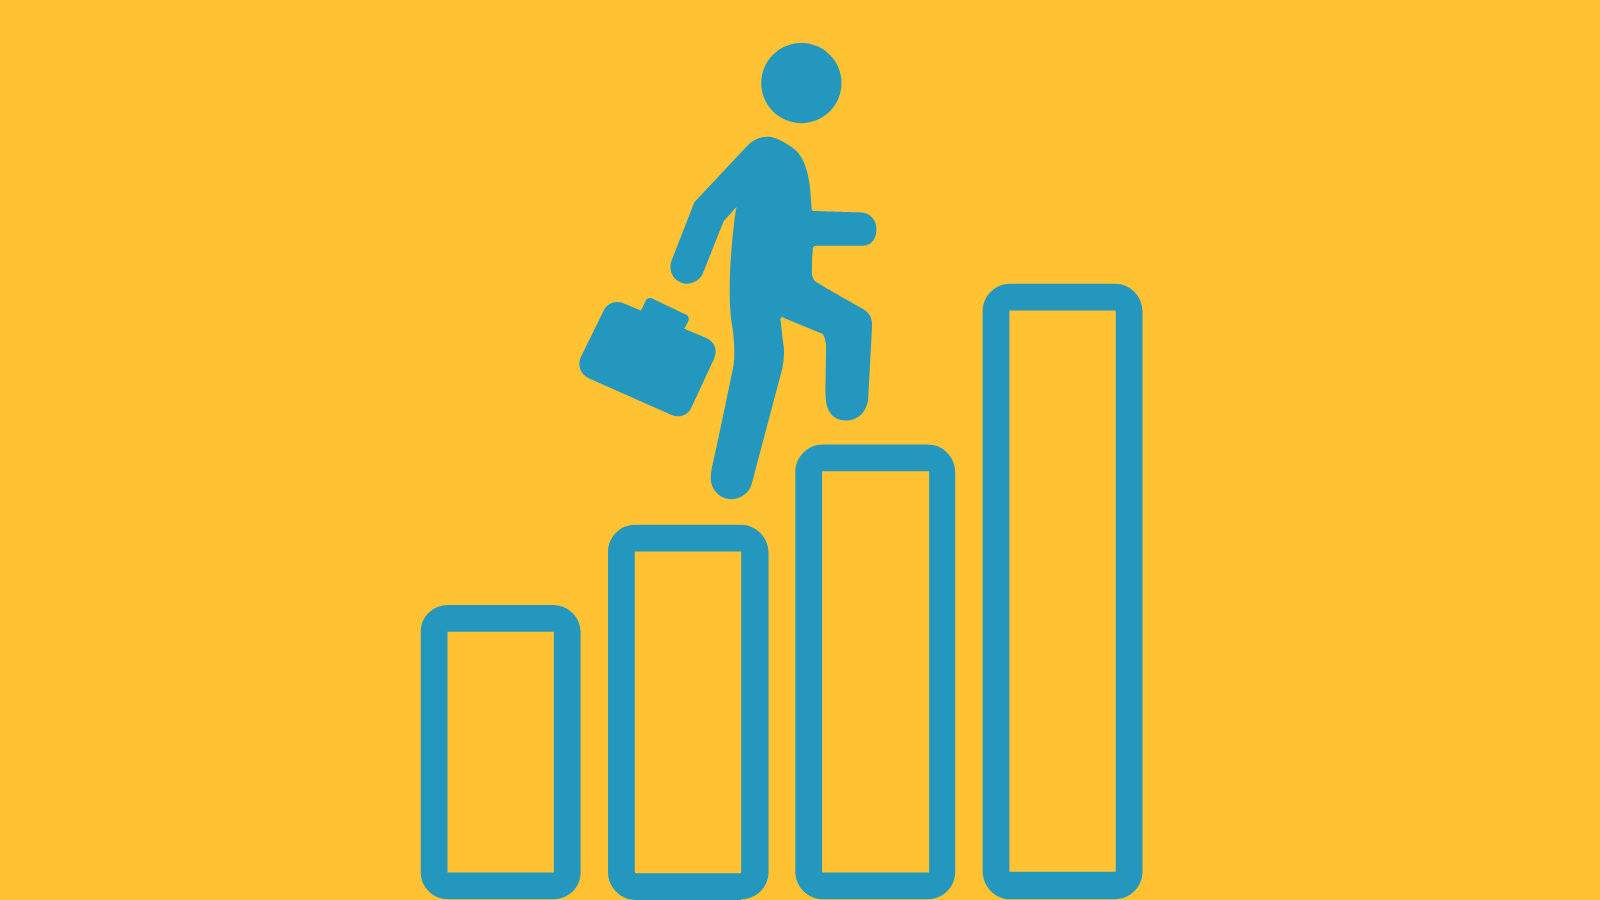 A person walking up the steps of a bar graph carrying a briefcase